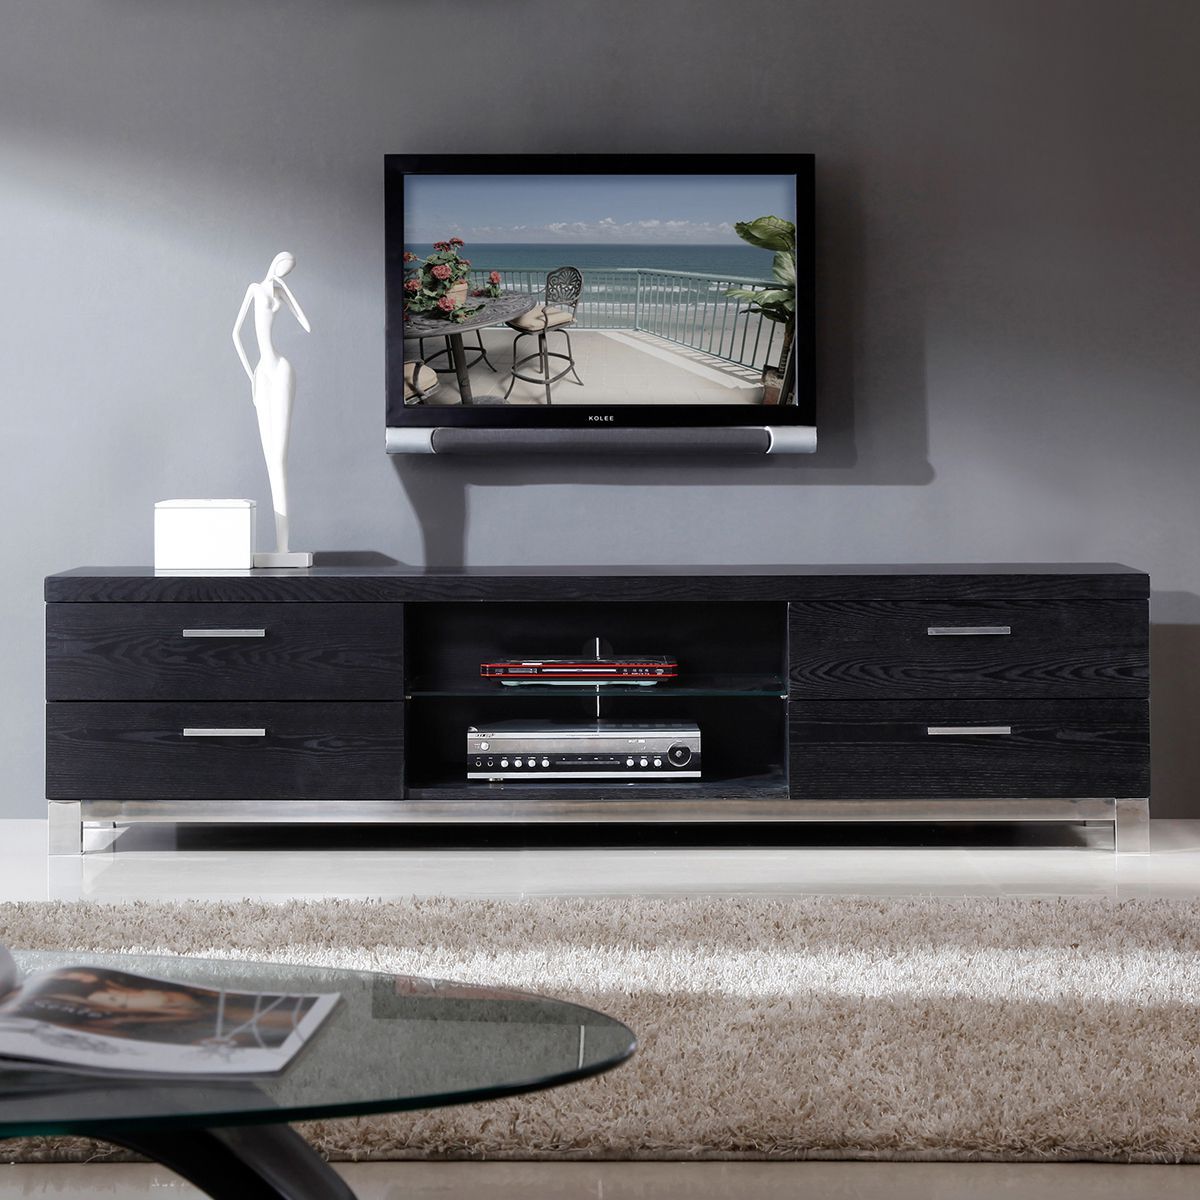 Choosing Contemporary Tv Stands For Modern Entertainment Within Contemporary Tv Stands (View 9 of 15)